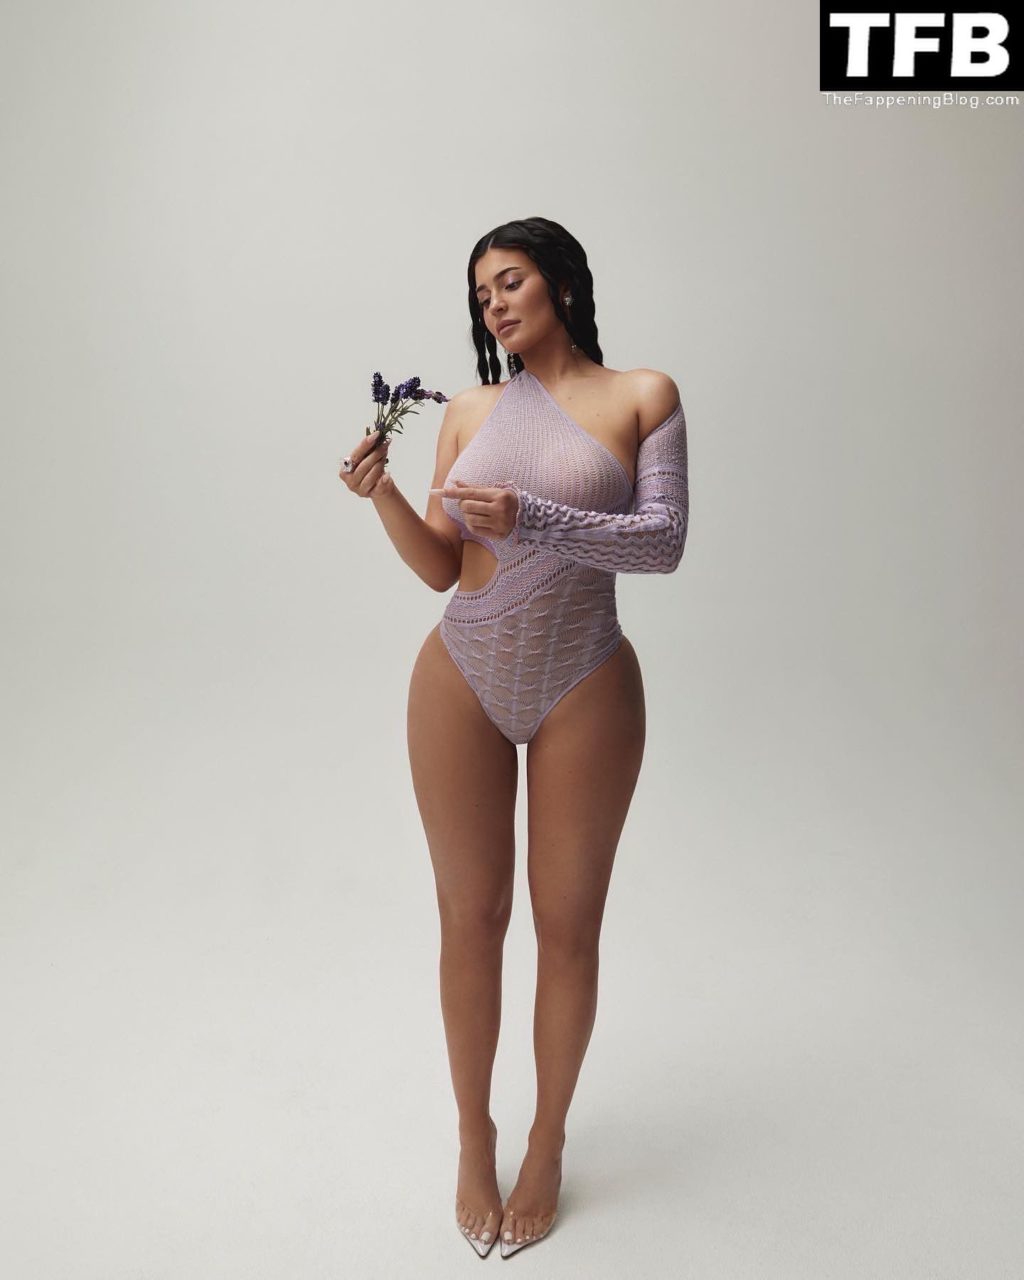 Kylie Jenner Promotes Her Kylie Skin Collection in a Sexy Shoot (13 Photos)